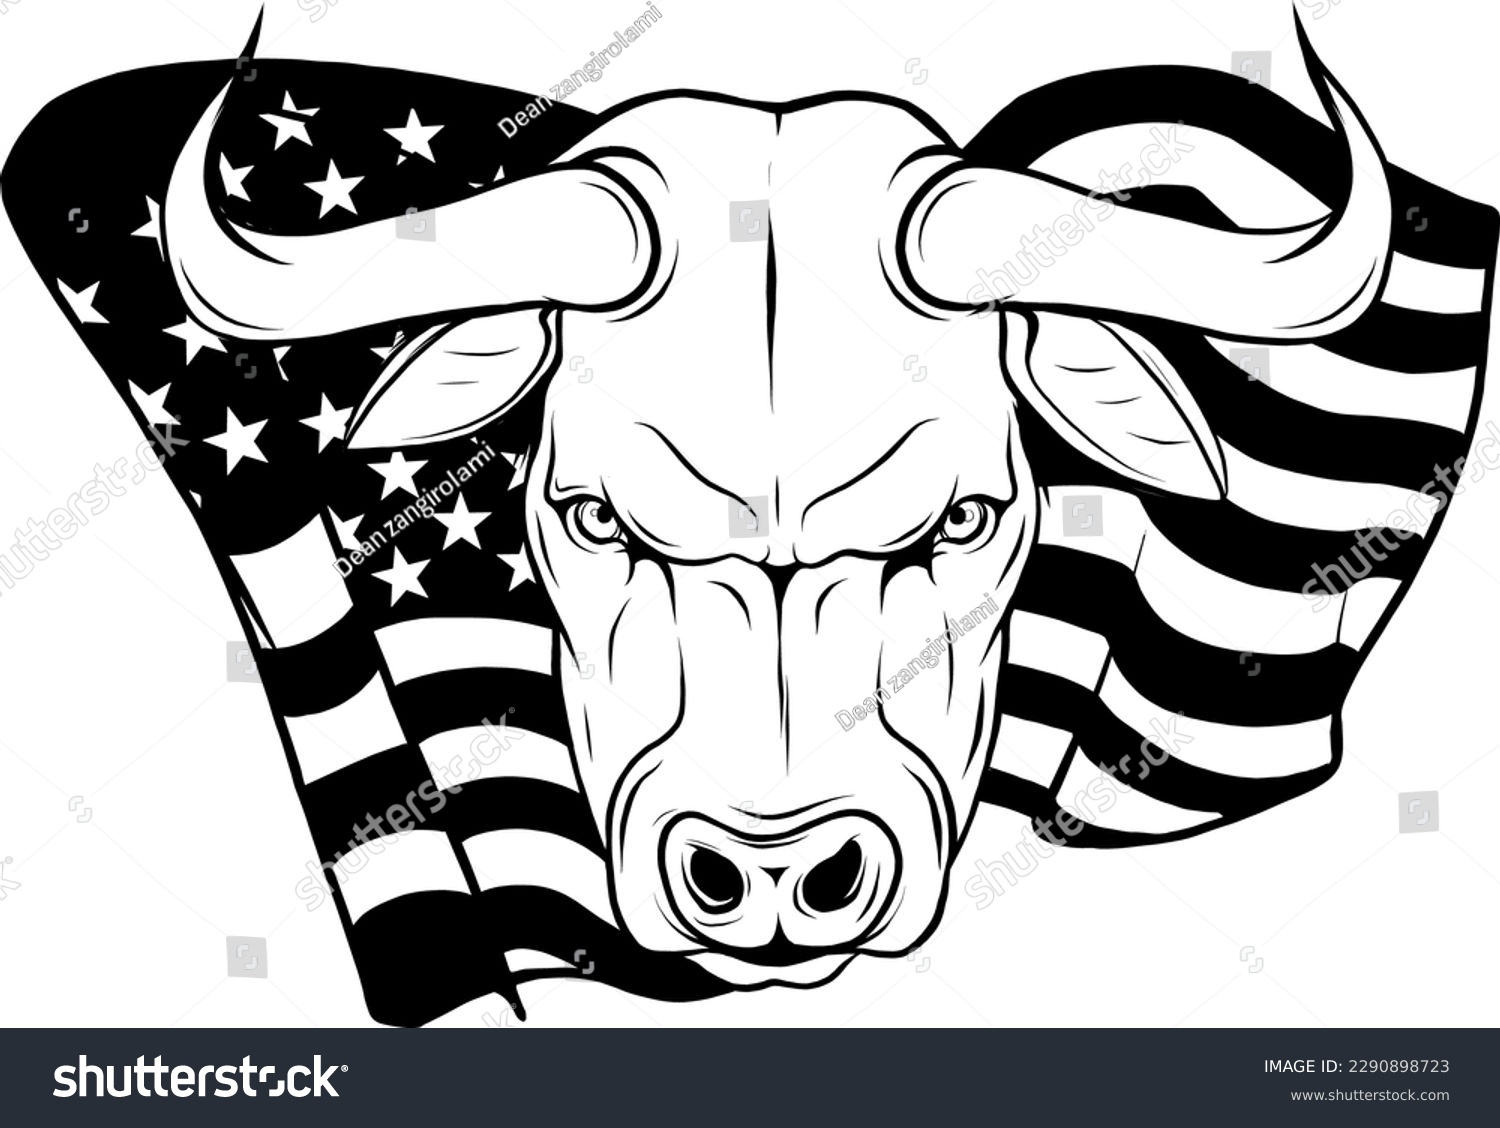 SVG of vector illustration of Monochrome head bull with usa flag svg